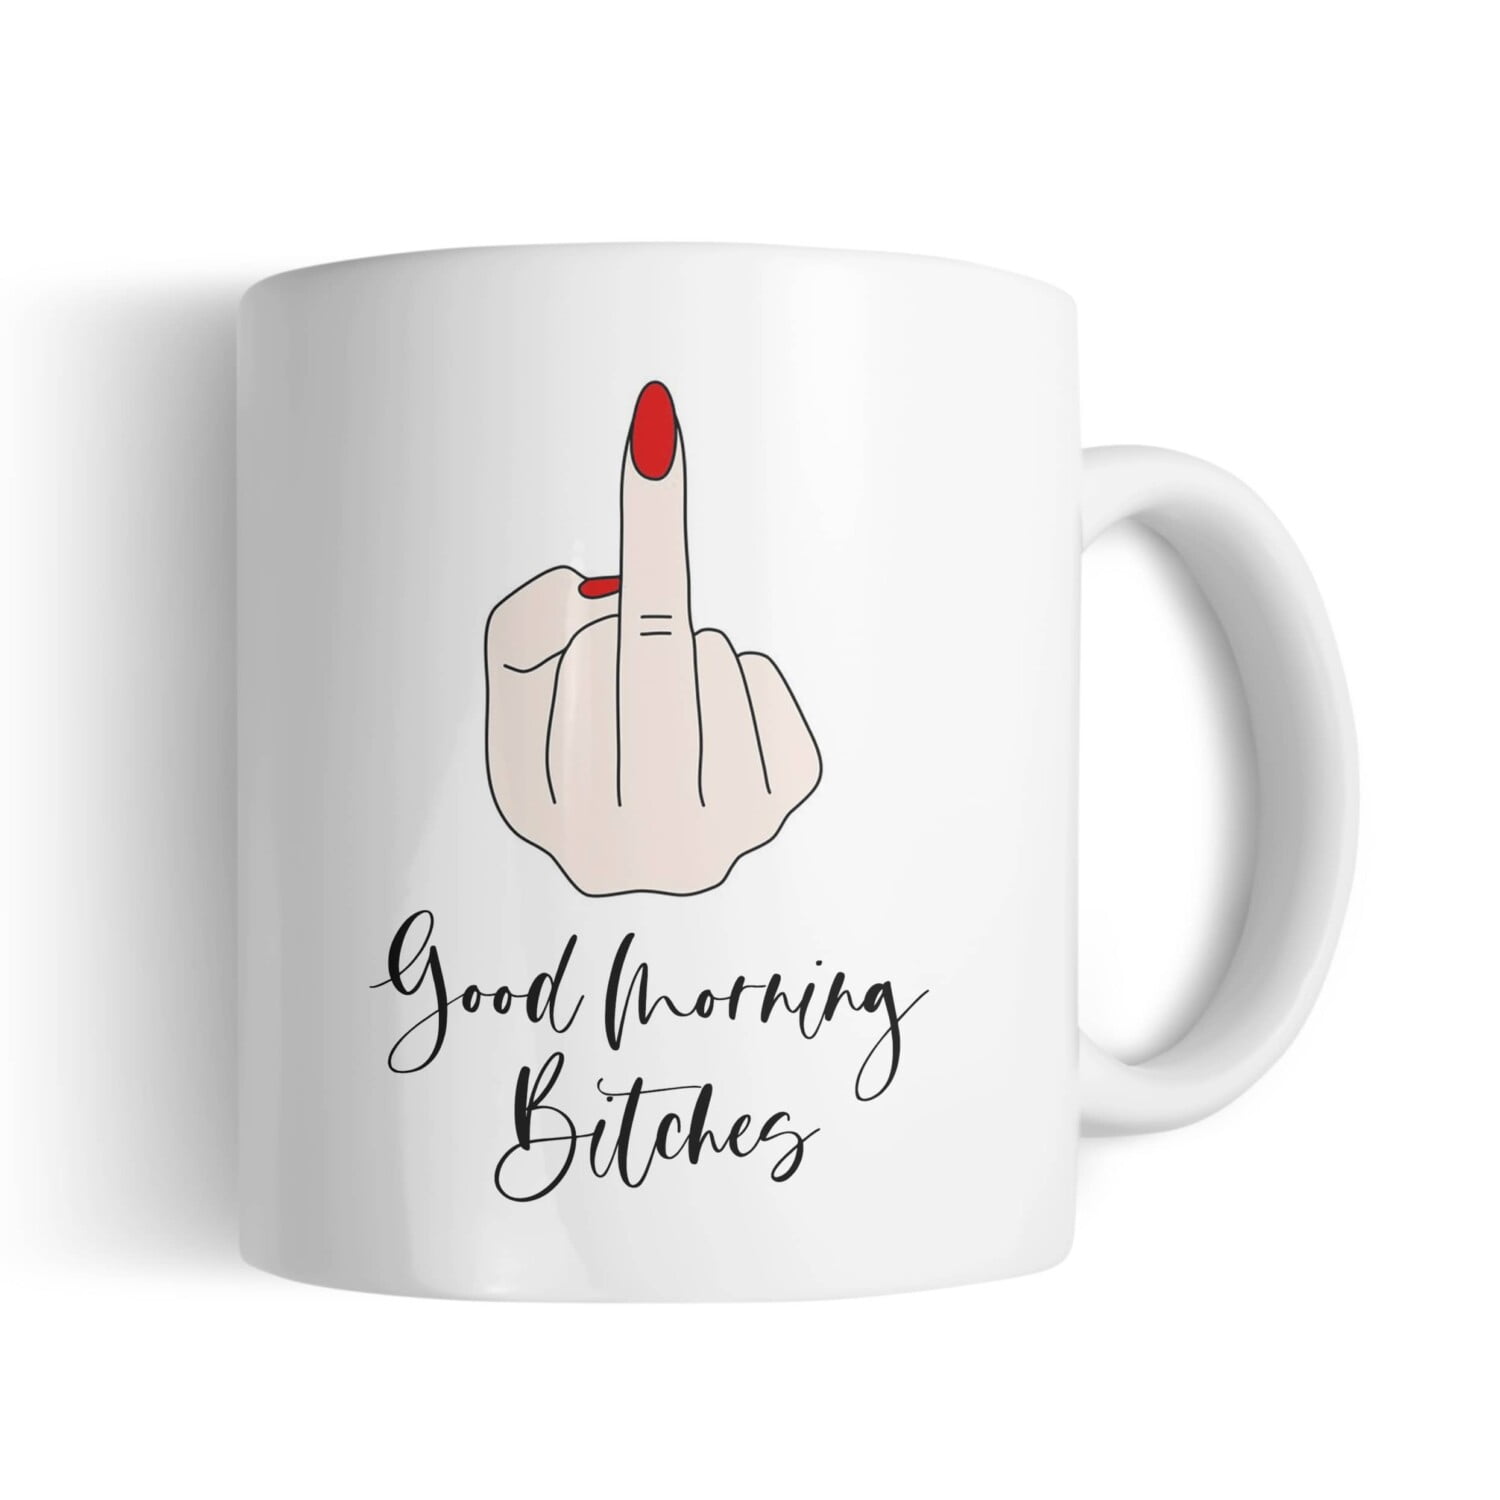 Good Morning Bitches Mug, Printing in County Monaghan, Ireland by Design Gaff